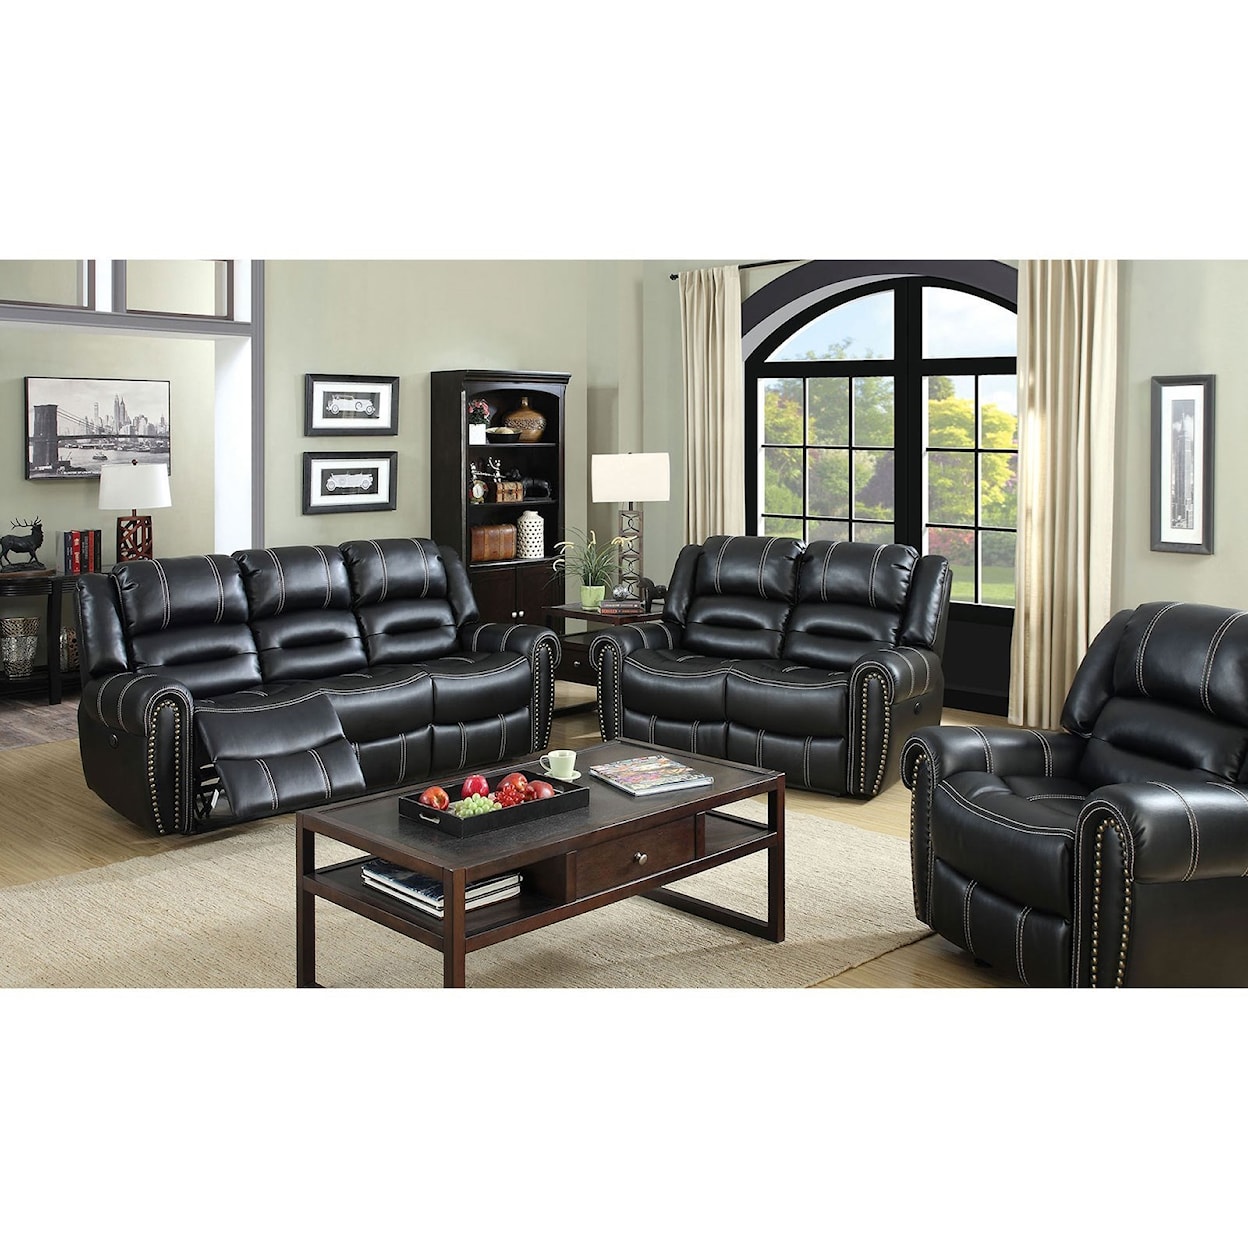 Furniture of America Frederick Reclining Living Room Group